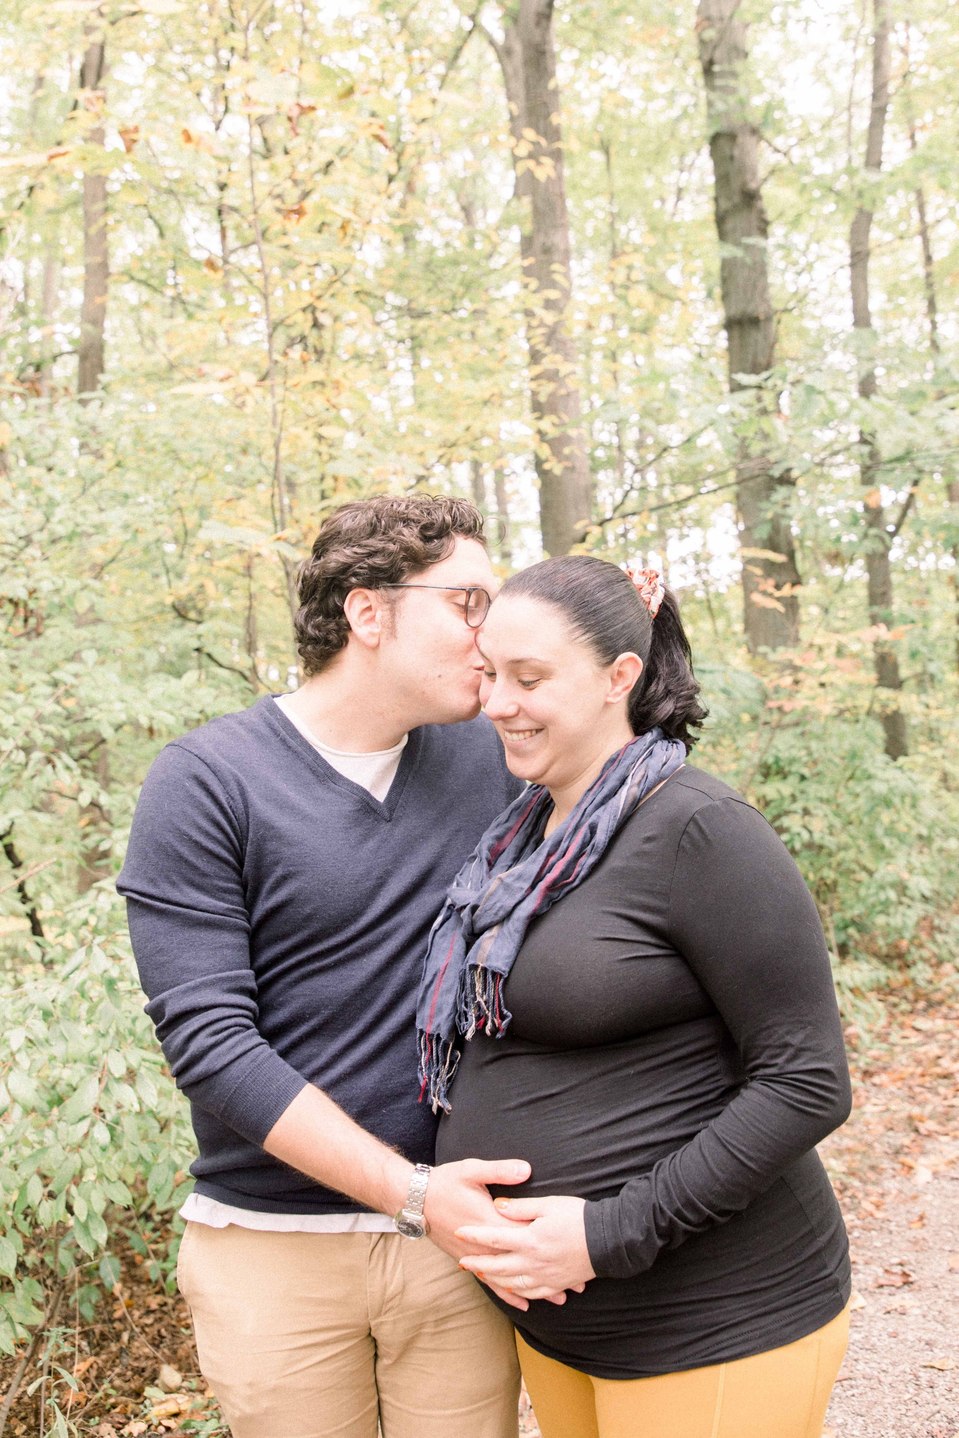 Maternity portrait of man and woman laughing, Fall photos, Niagara family photographer, family photography, Niagara portrait photographer, portrait photography, Emily VanderBeek Photography.